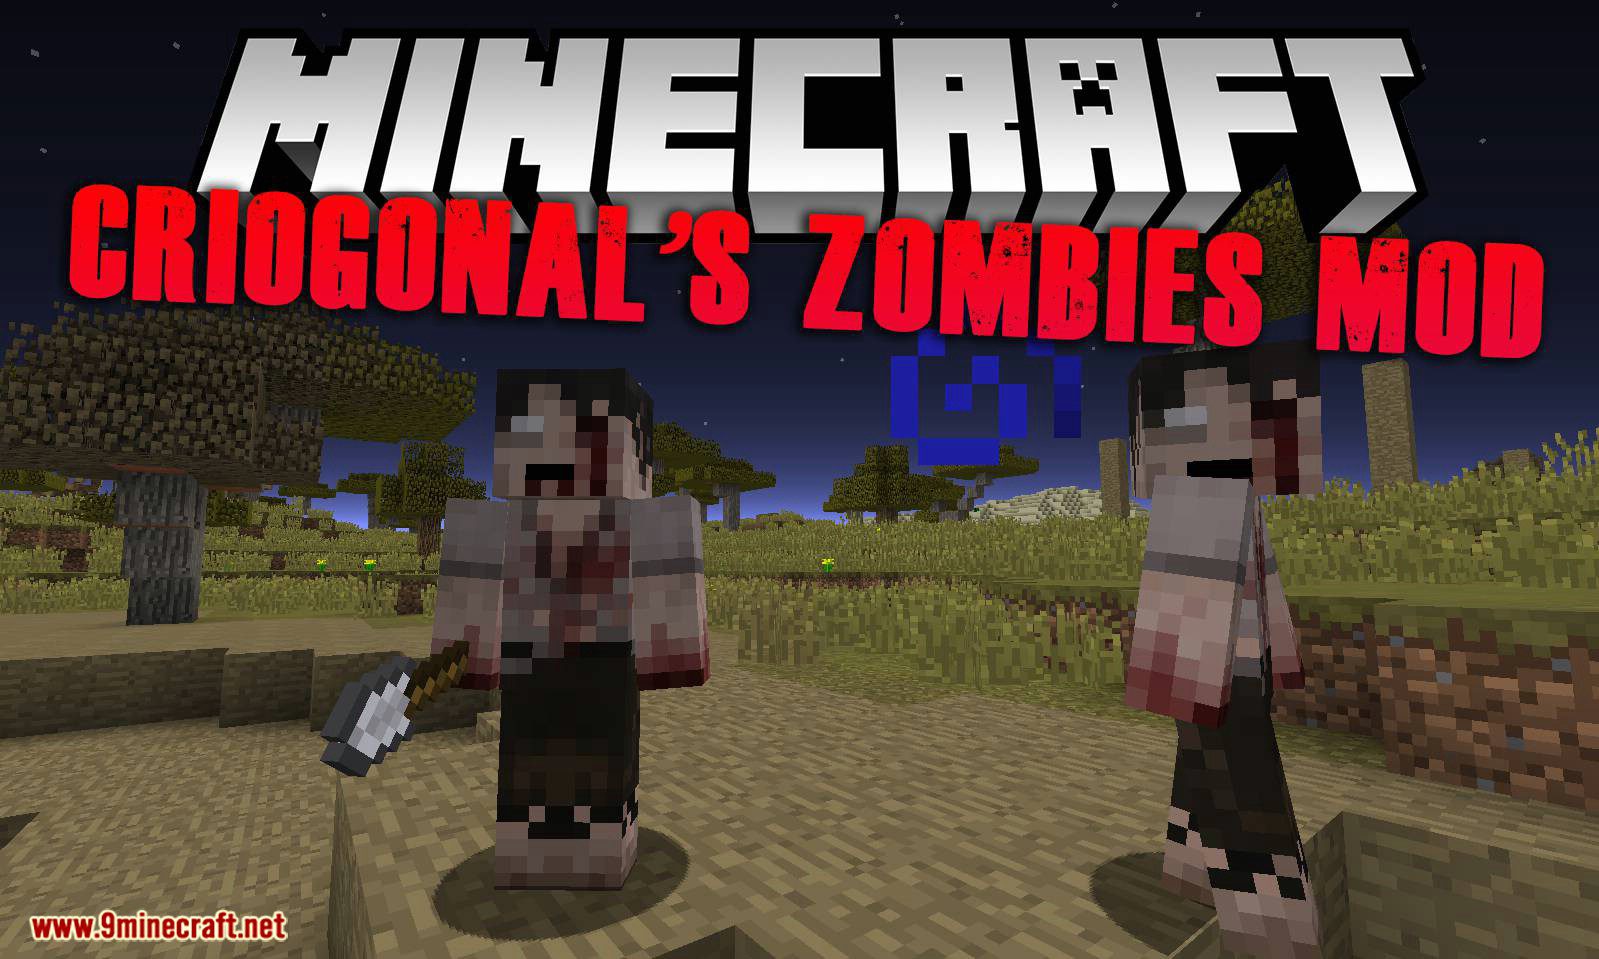 Criogonal S Zombies Mod 1 12 2 Adds Over 30 Zombies With Different Skins Lurkit